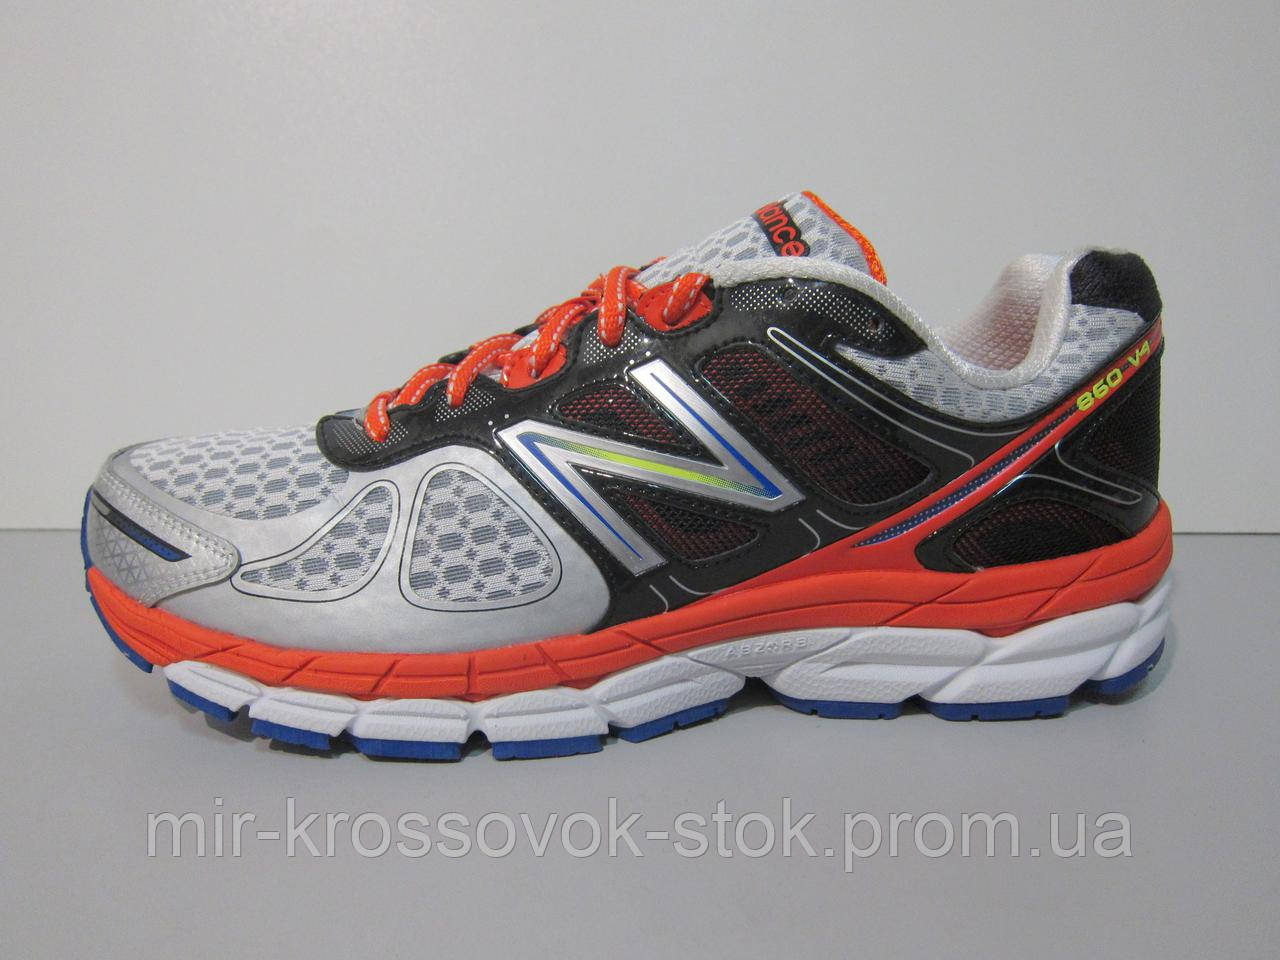 new balance men's stability running shoes